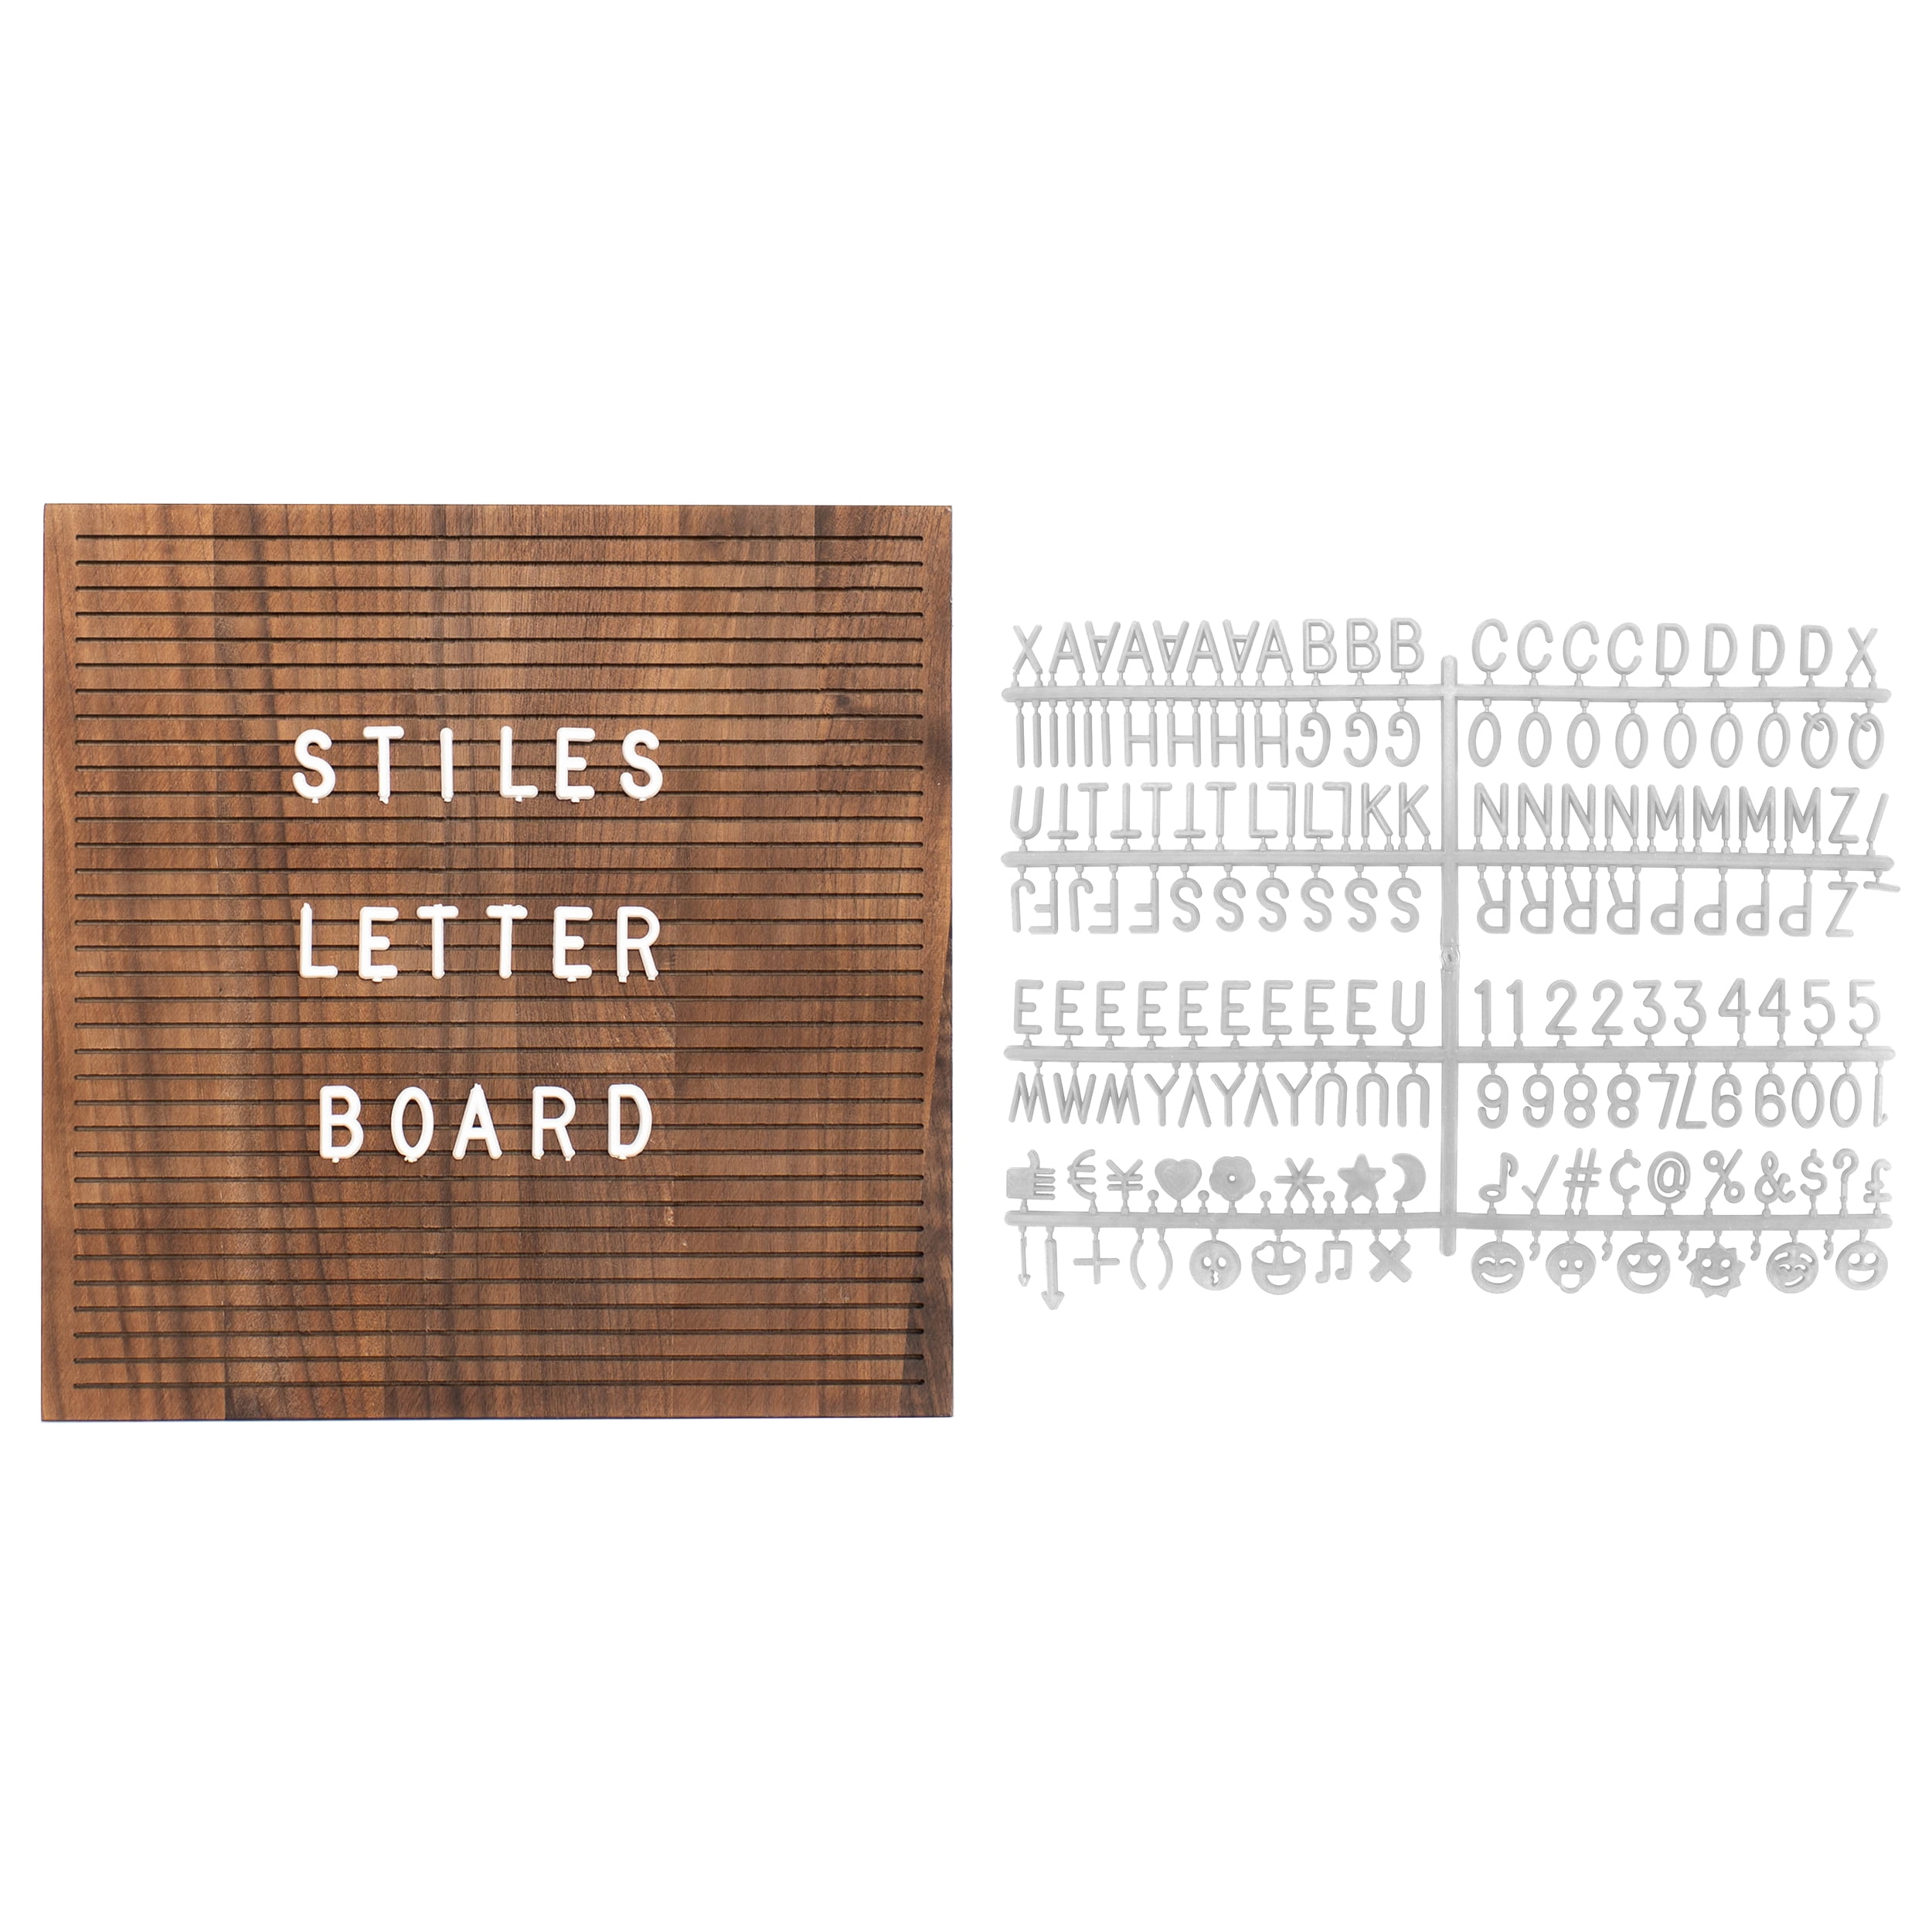 Stiles Letter Board Table Top Easel, Wooden Desktop Easel for Announcement Boards, Paintings, or Canvases, 8 by 15 Inches, Small